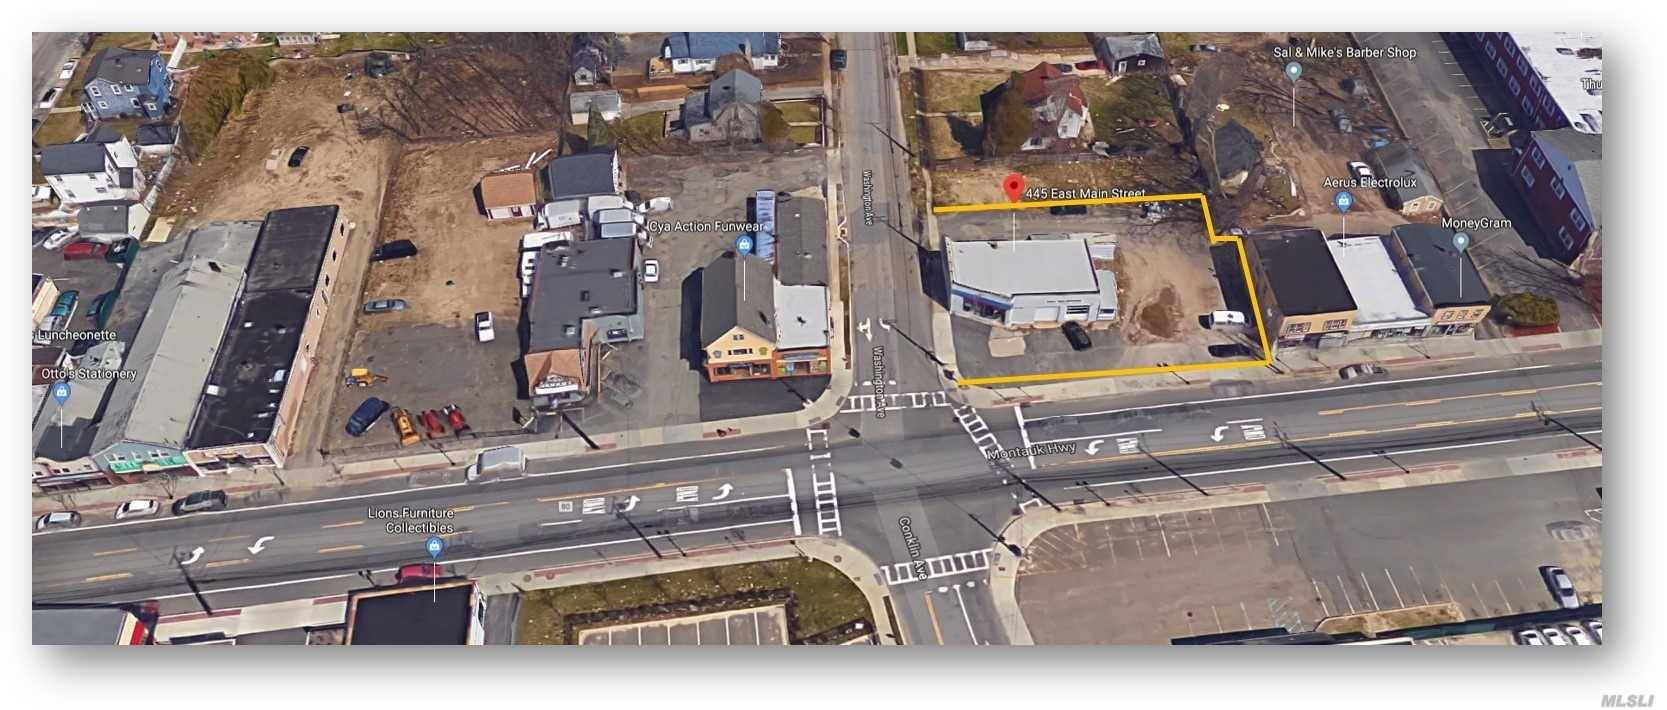 2, 029 SF Retail Service Station at 4 way traffic light this property features 3 curb cuts on a 0.